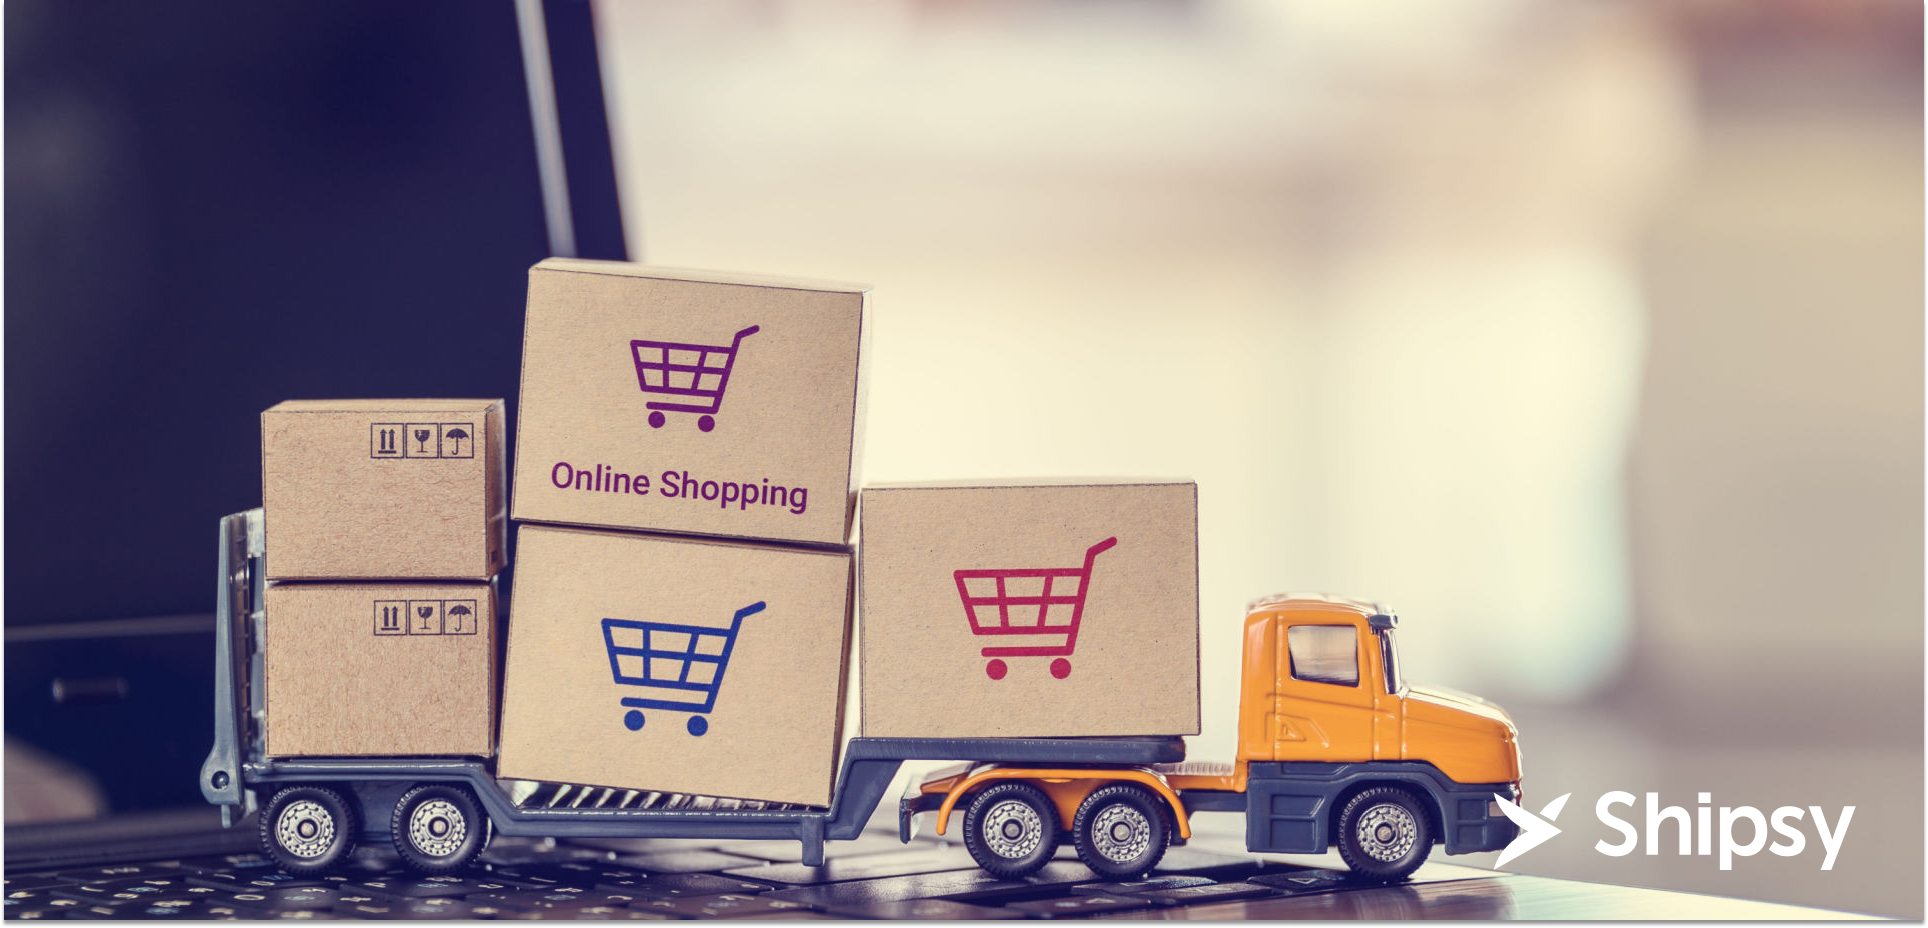 eCommerce Order Fulfillment: Optimizing the Business Growth and Customer Experience With Automation